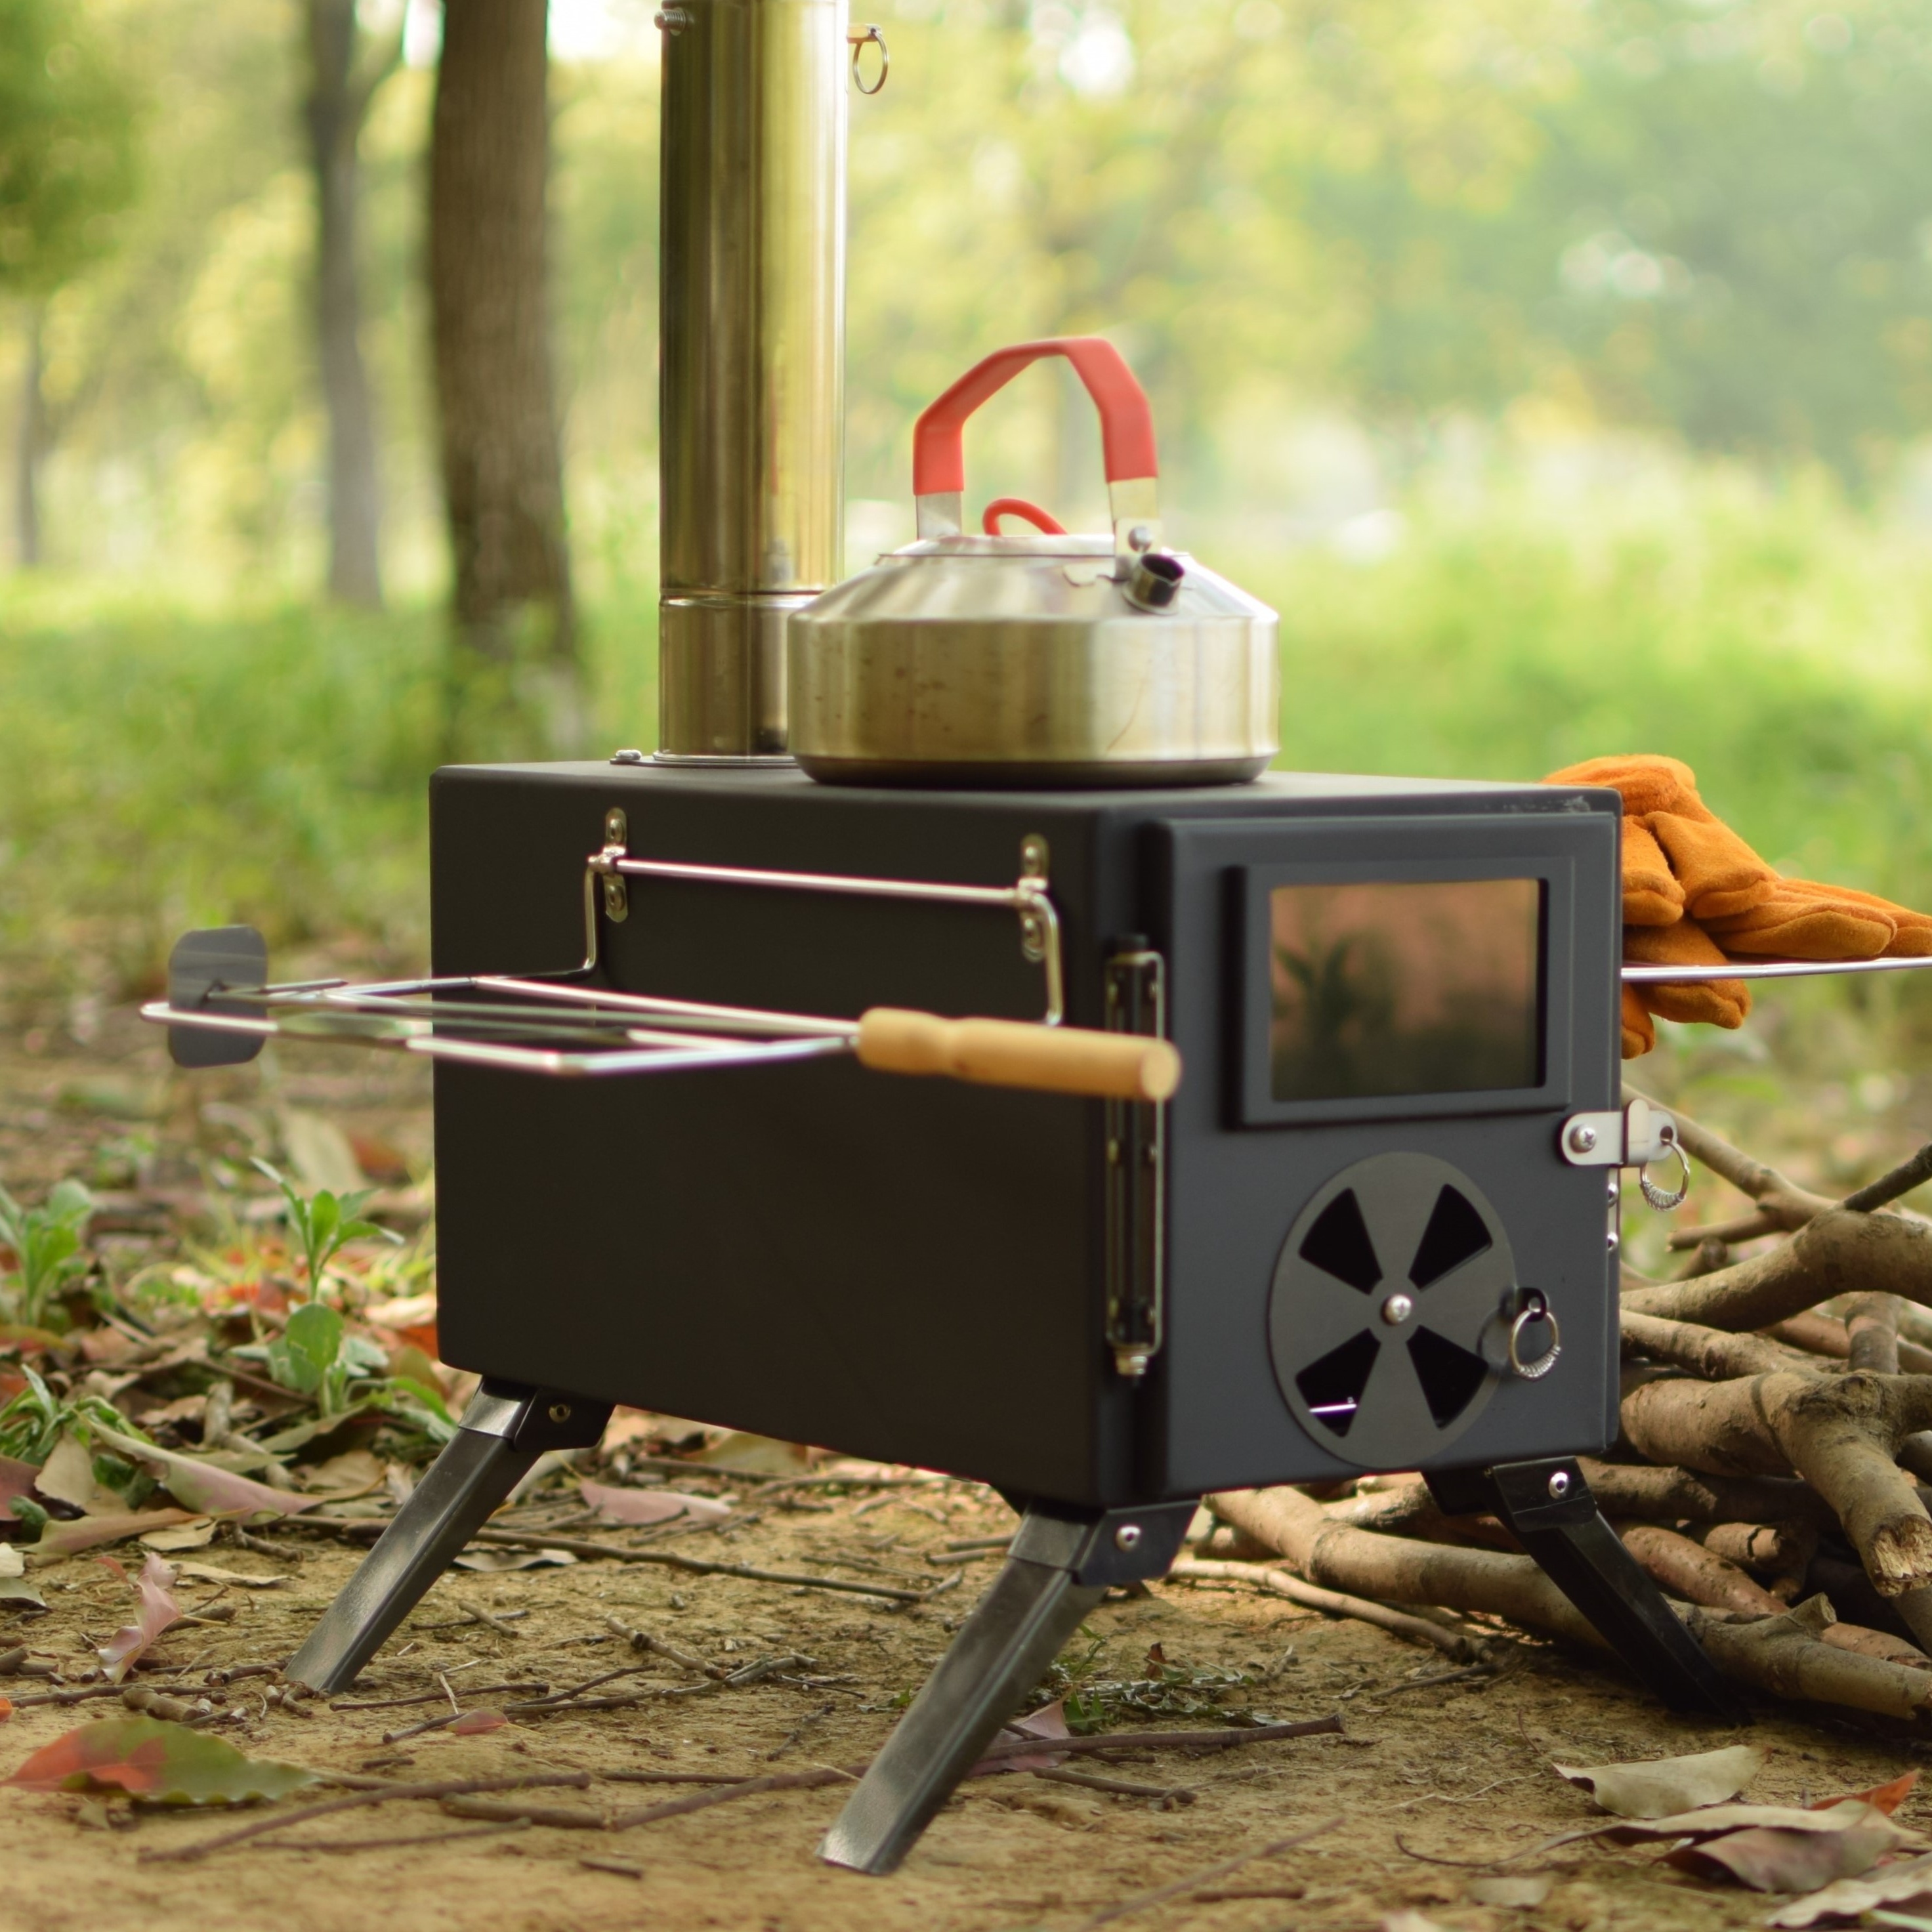 Camping Oven Stove Outdoor Folding Baking Smoked Oven Insulation Stainless  Steel Barbecue Oven Hiking Picnic BBQ Grilling Stove - AliExpress